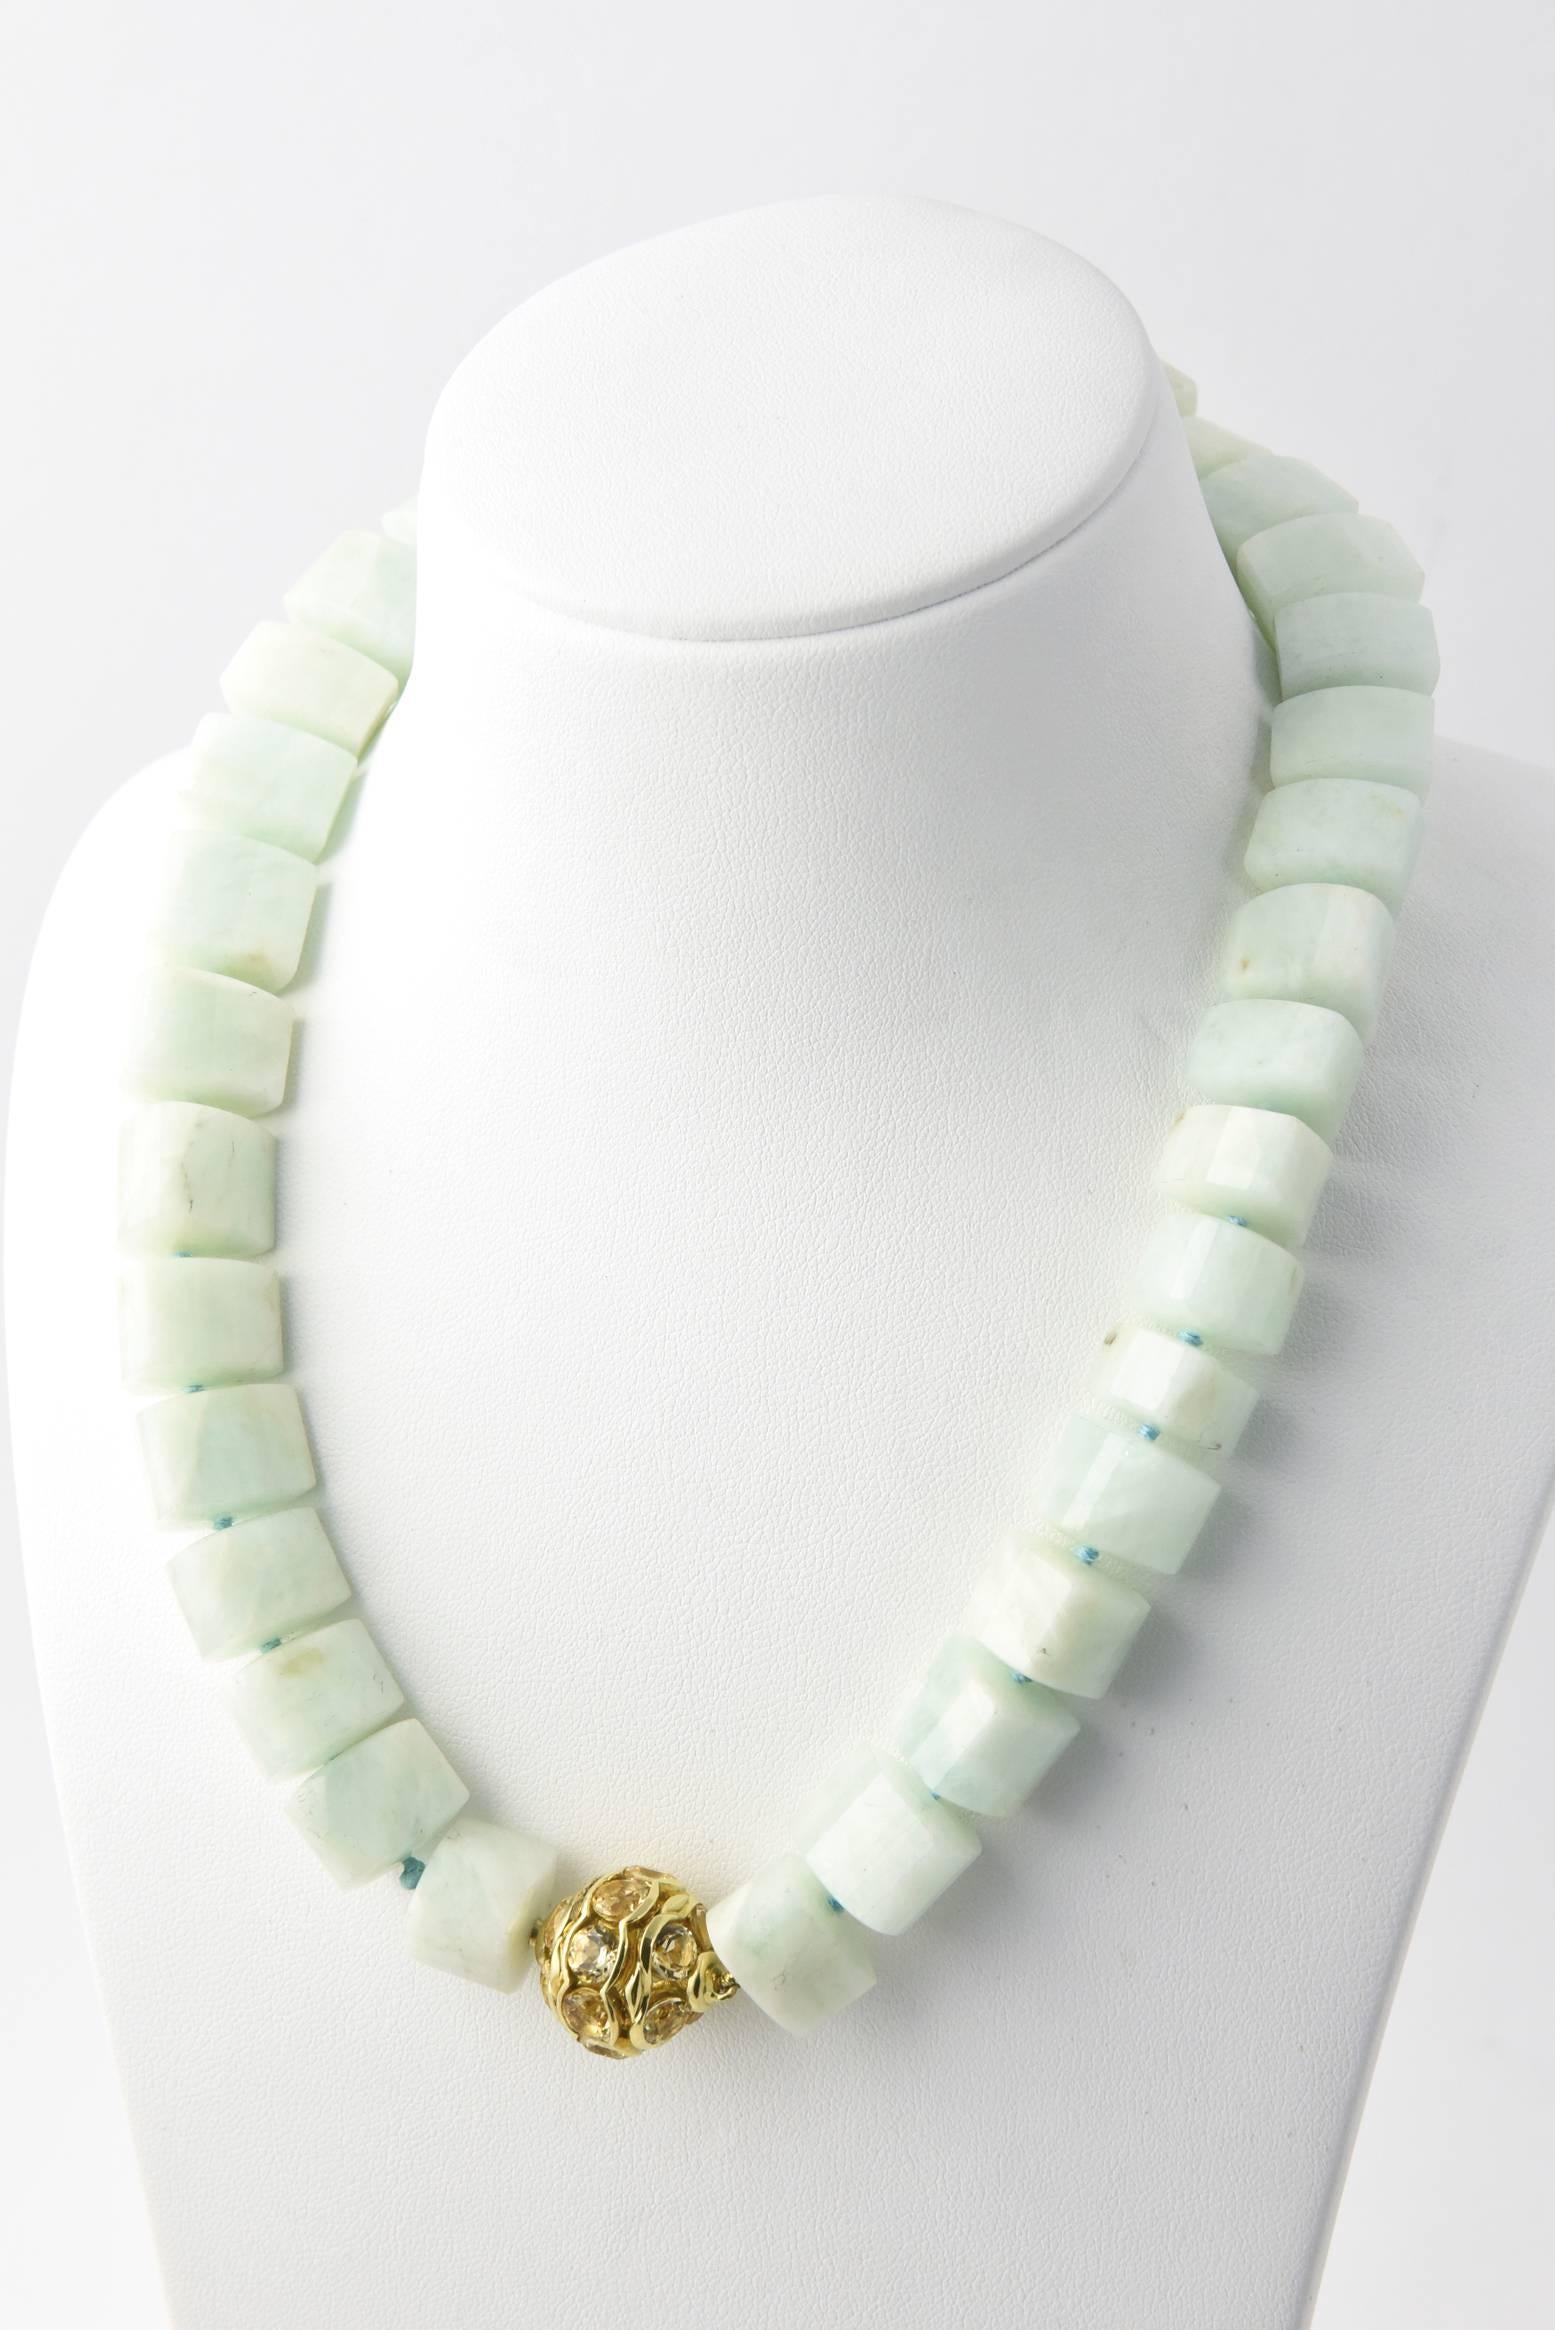 David Yurman Couture Collection Aquamarine Necklace with Citrine and Gold Clasp 1